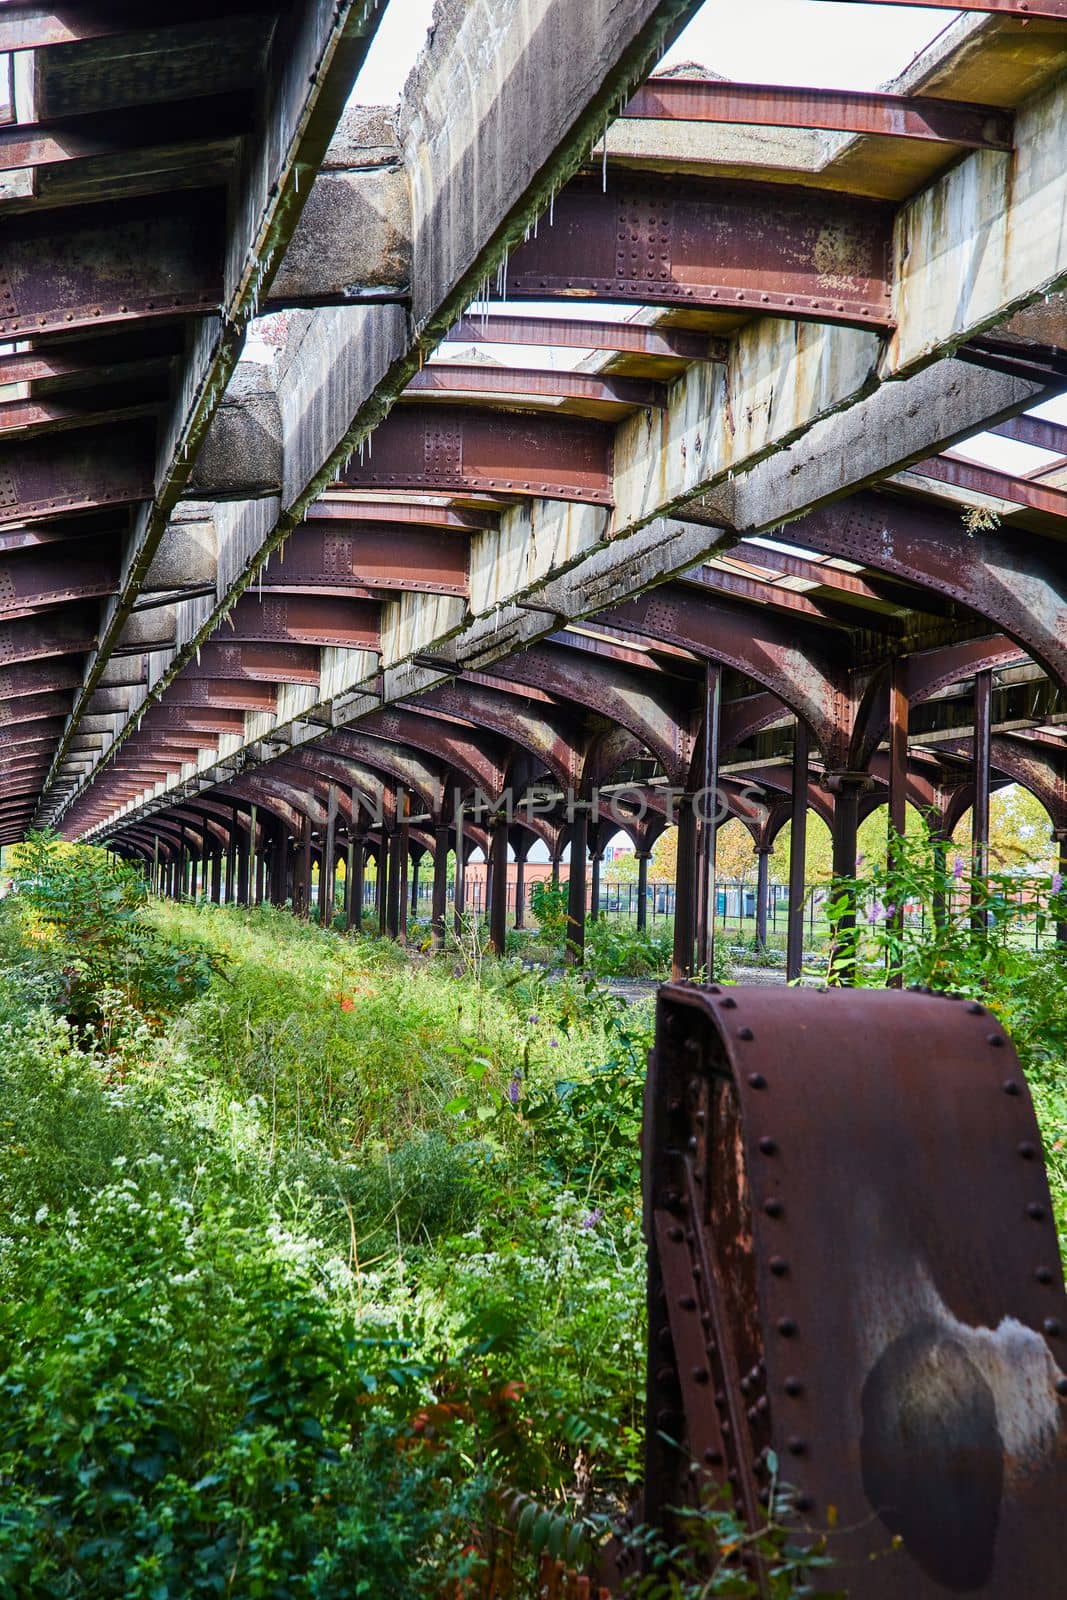 Image of Overgrowth fills abandoned train track station with arched steel ceiling to sky